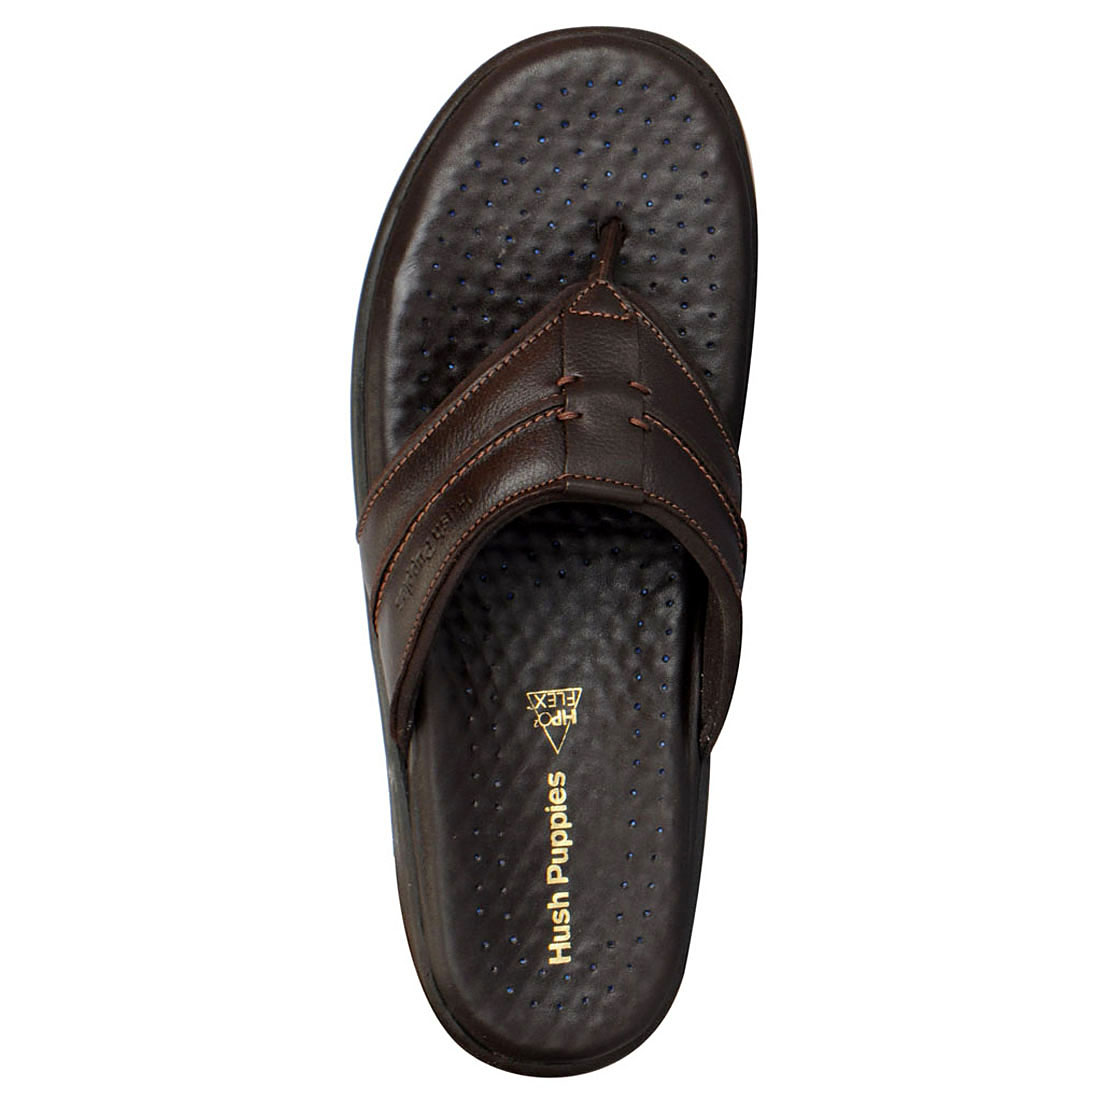 Buy Hush Puppies Mens Brown Slippers Online @ ₹2442 from ShopClues